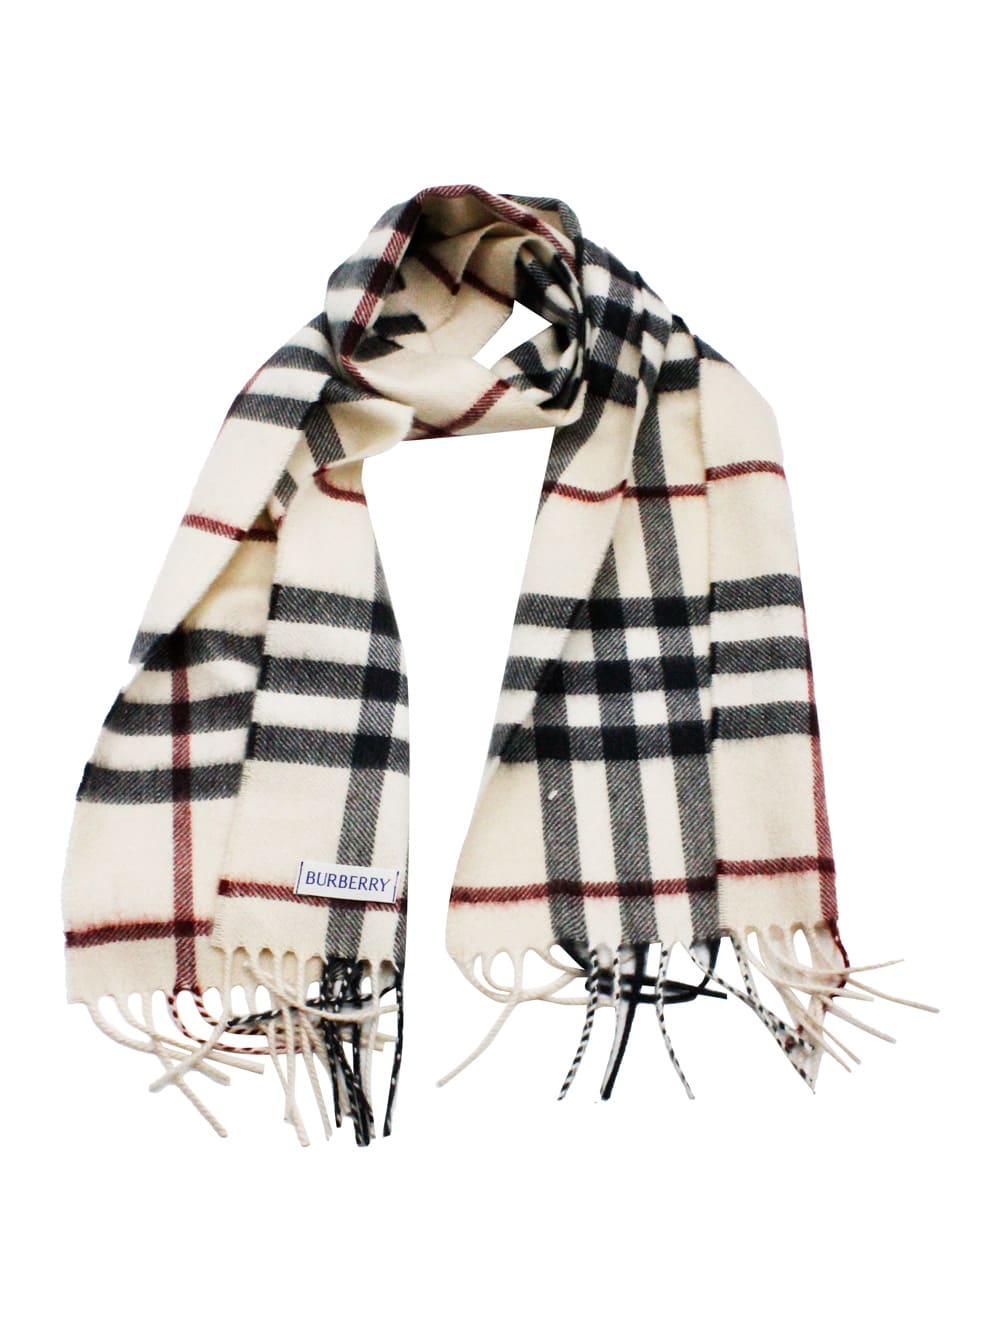 Burberry Scarf In Pure And Soft Cashmere With Check Pattern And Fringes At The Hem Measuring 130 X 20